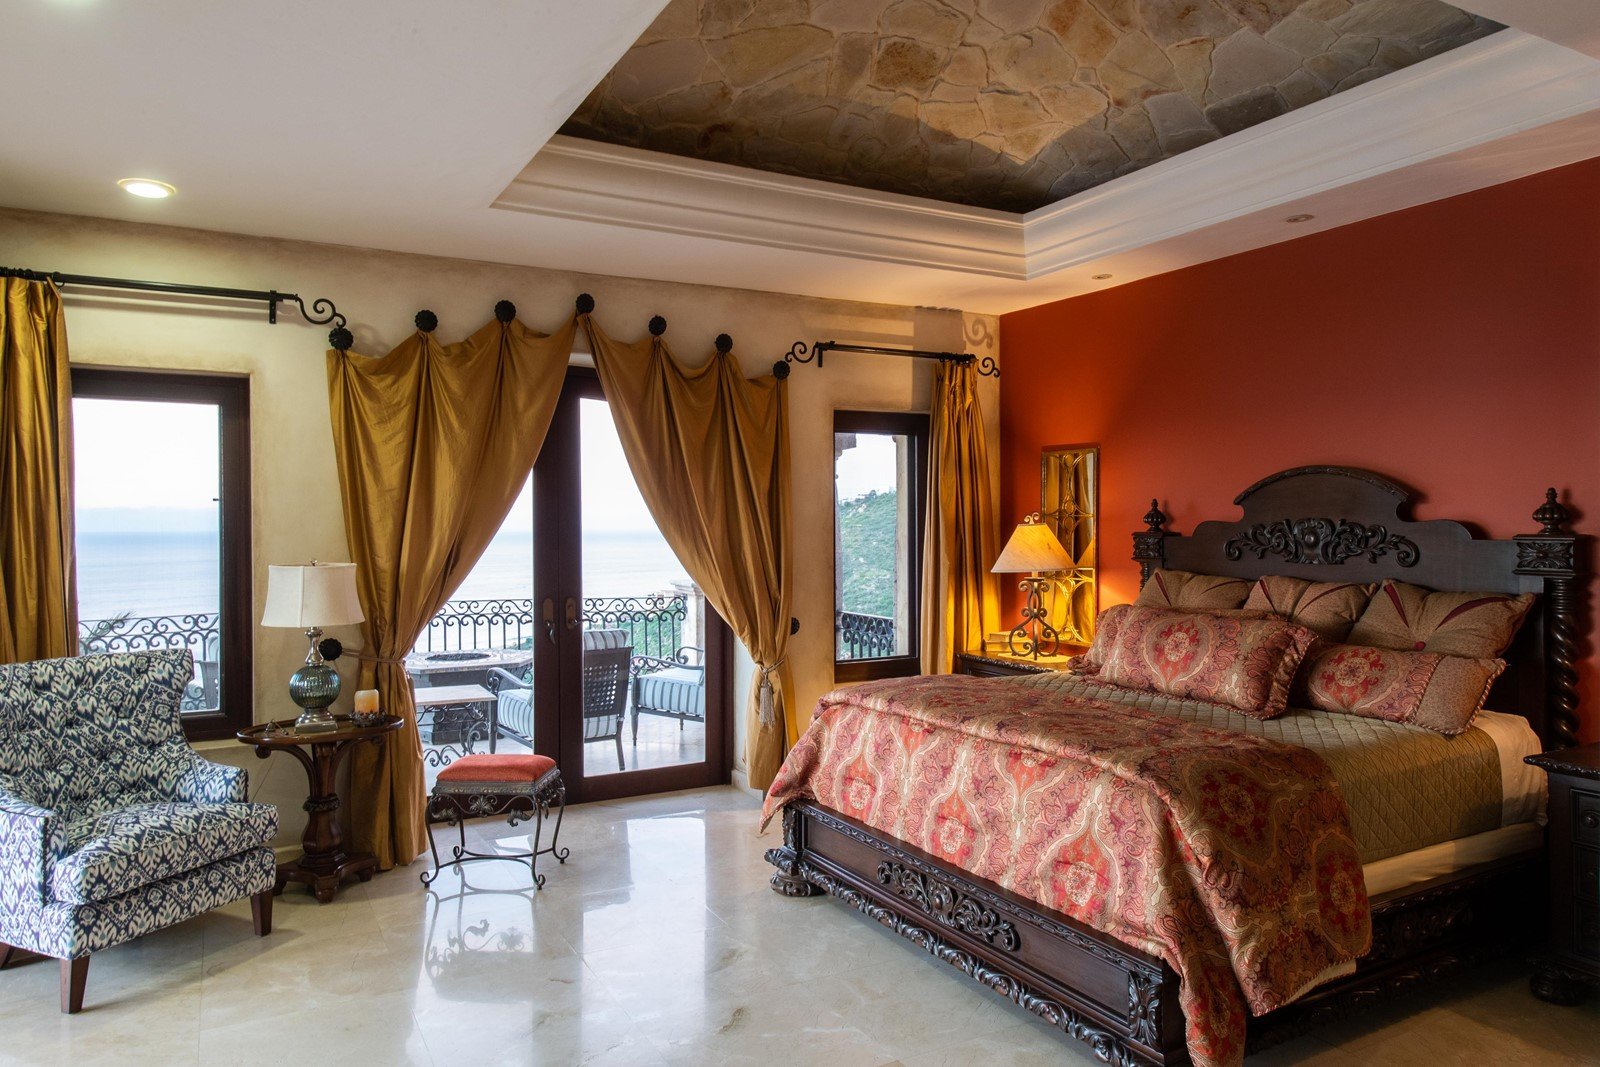 One of the bedrooms in Villa Maria with a view of the ocean from the balcony.